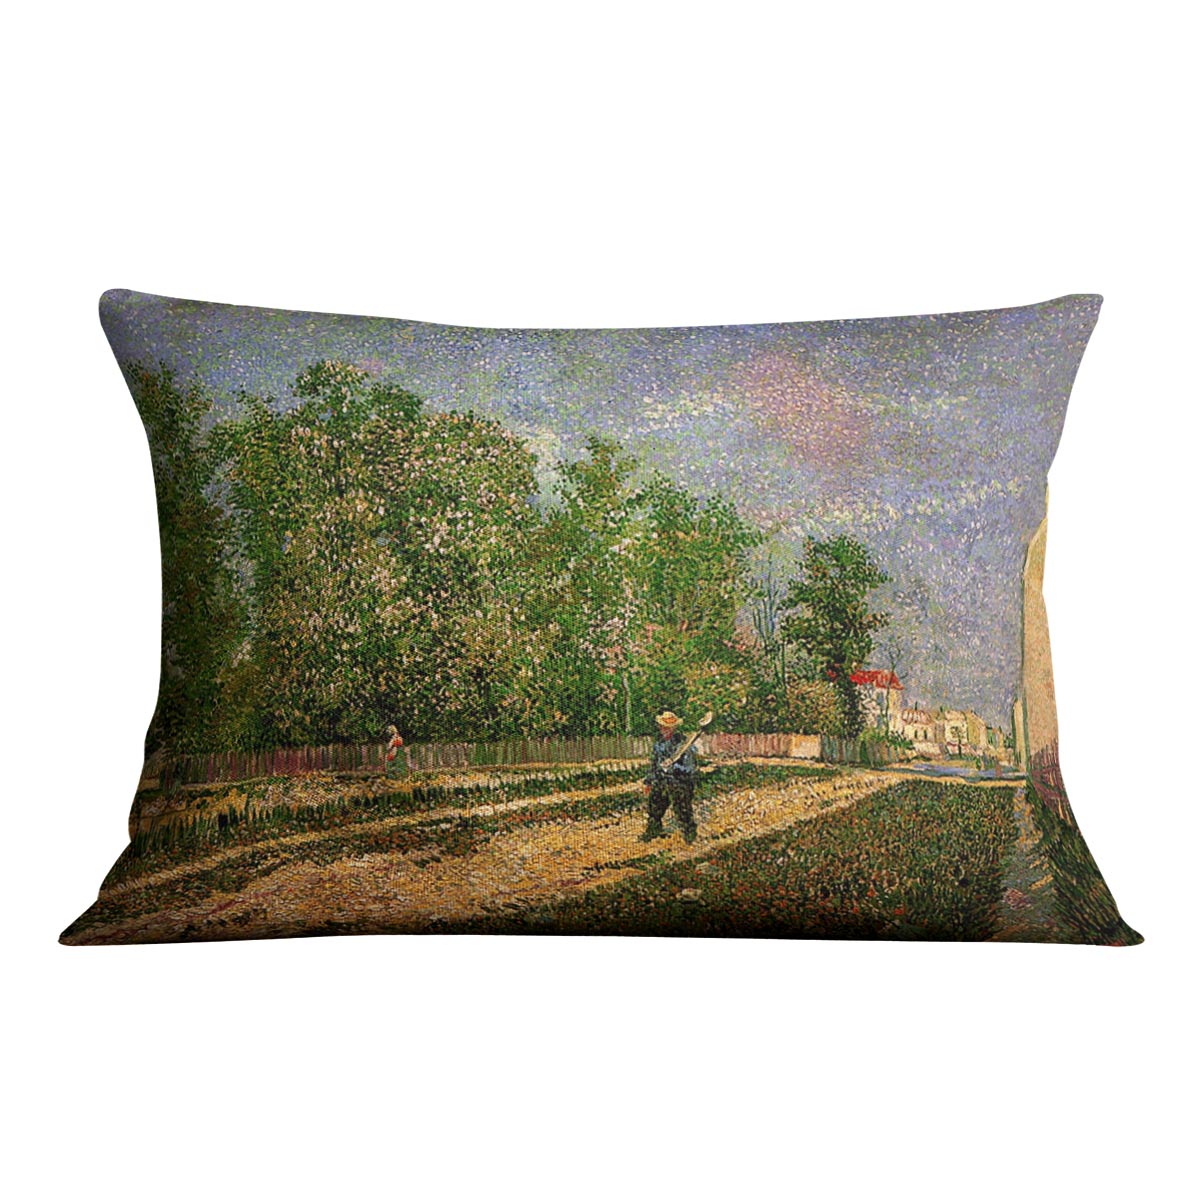 Outskirts of Paris Road with Peasant Shouldering a Spade by Van Gogh Cushion